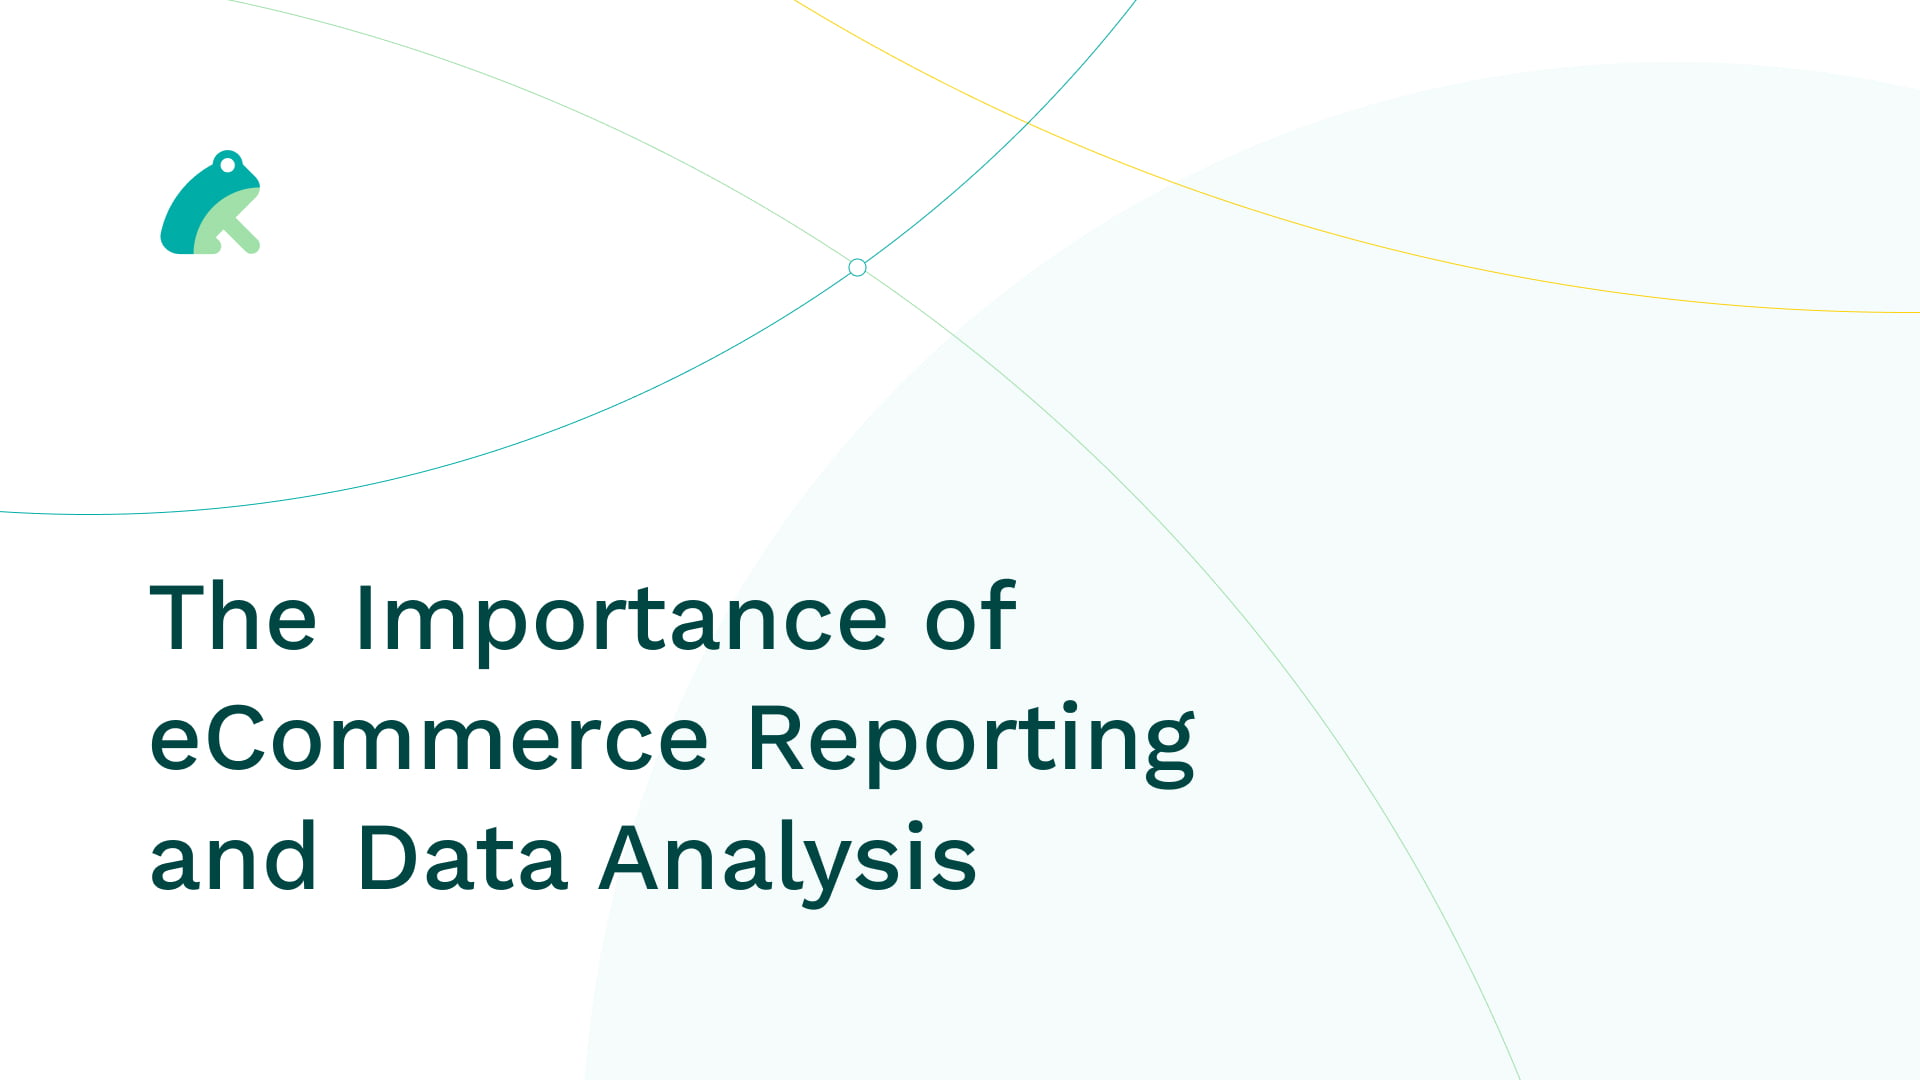 The Importance of eCommerce Reporting and Data Analysis